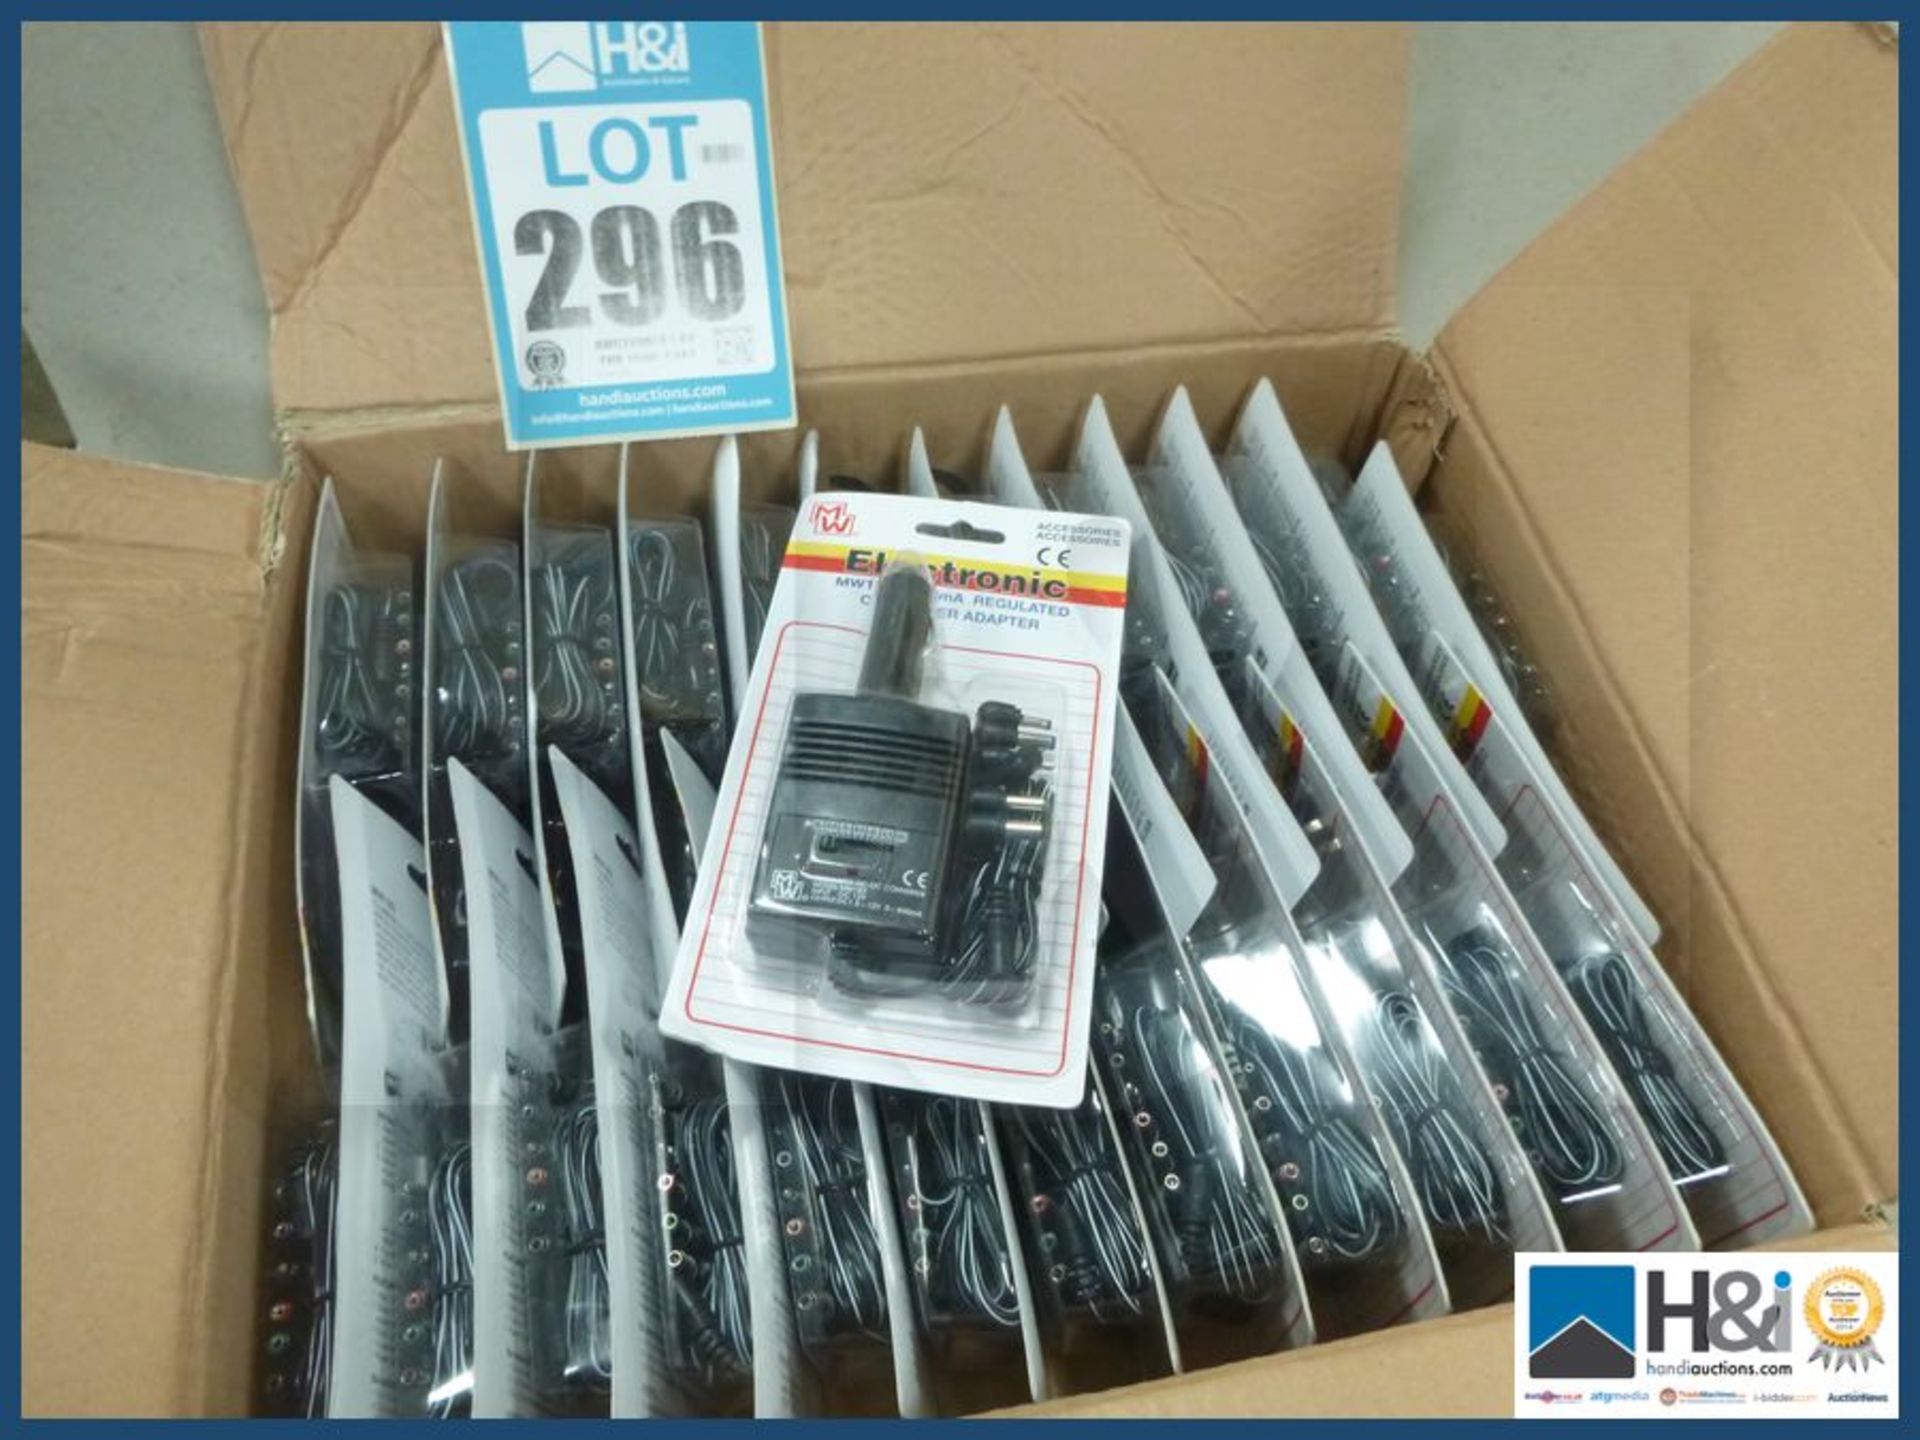 12v regulated car power adapter X 25 pcs. NO VAT on item except on buyers premium. Shipping and comb